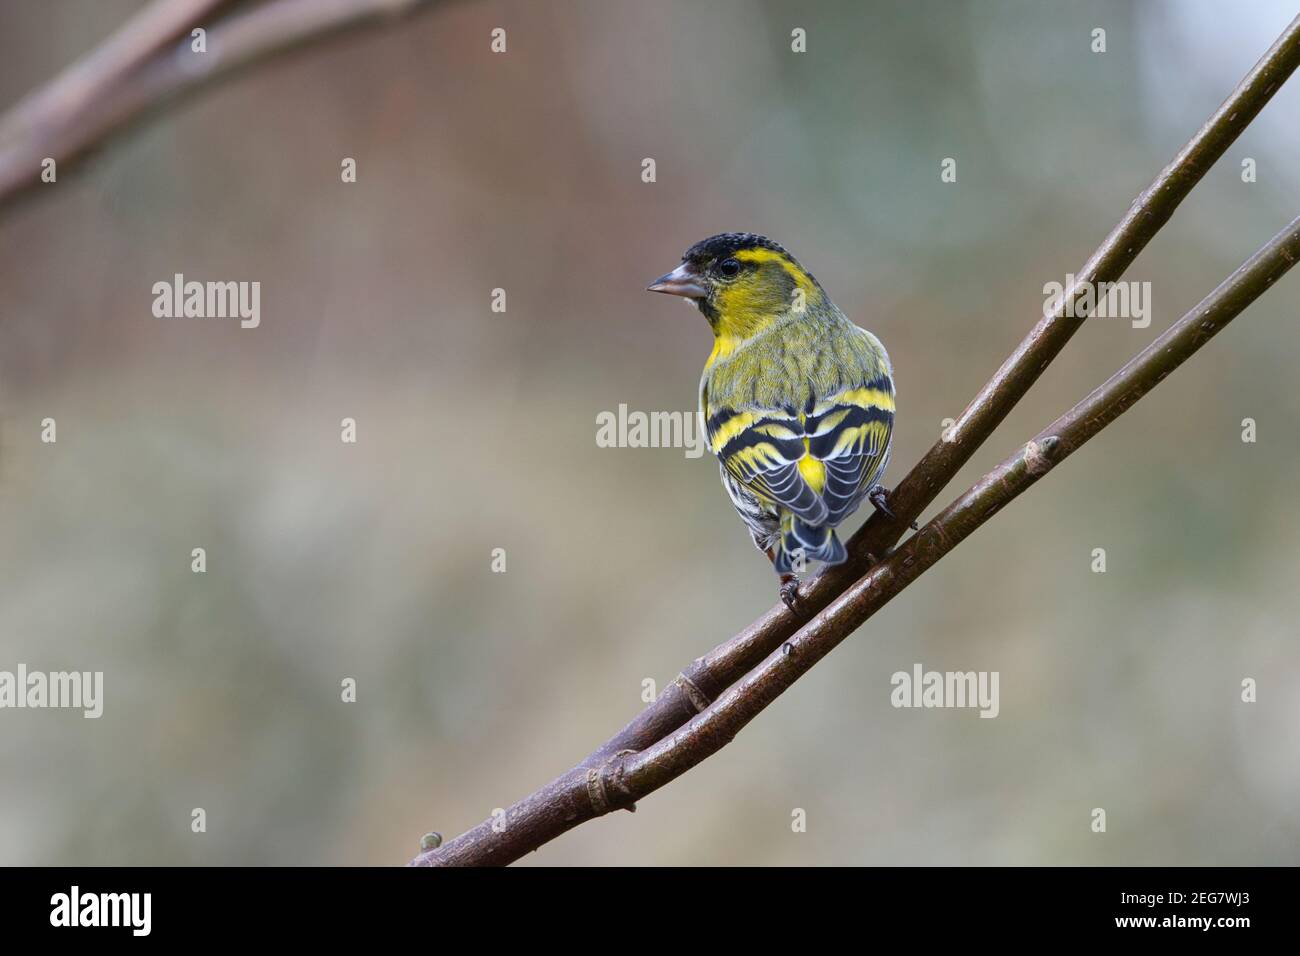 Adult male Eurasian siskin (Carduelis spinus) perched in a tree in a garden Stock Photo